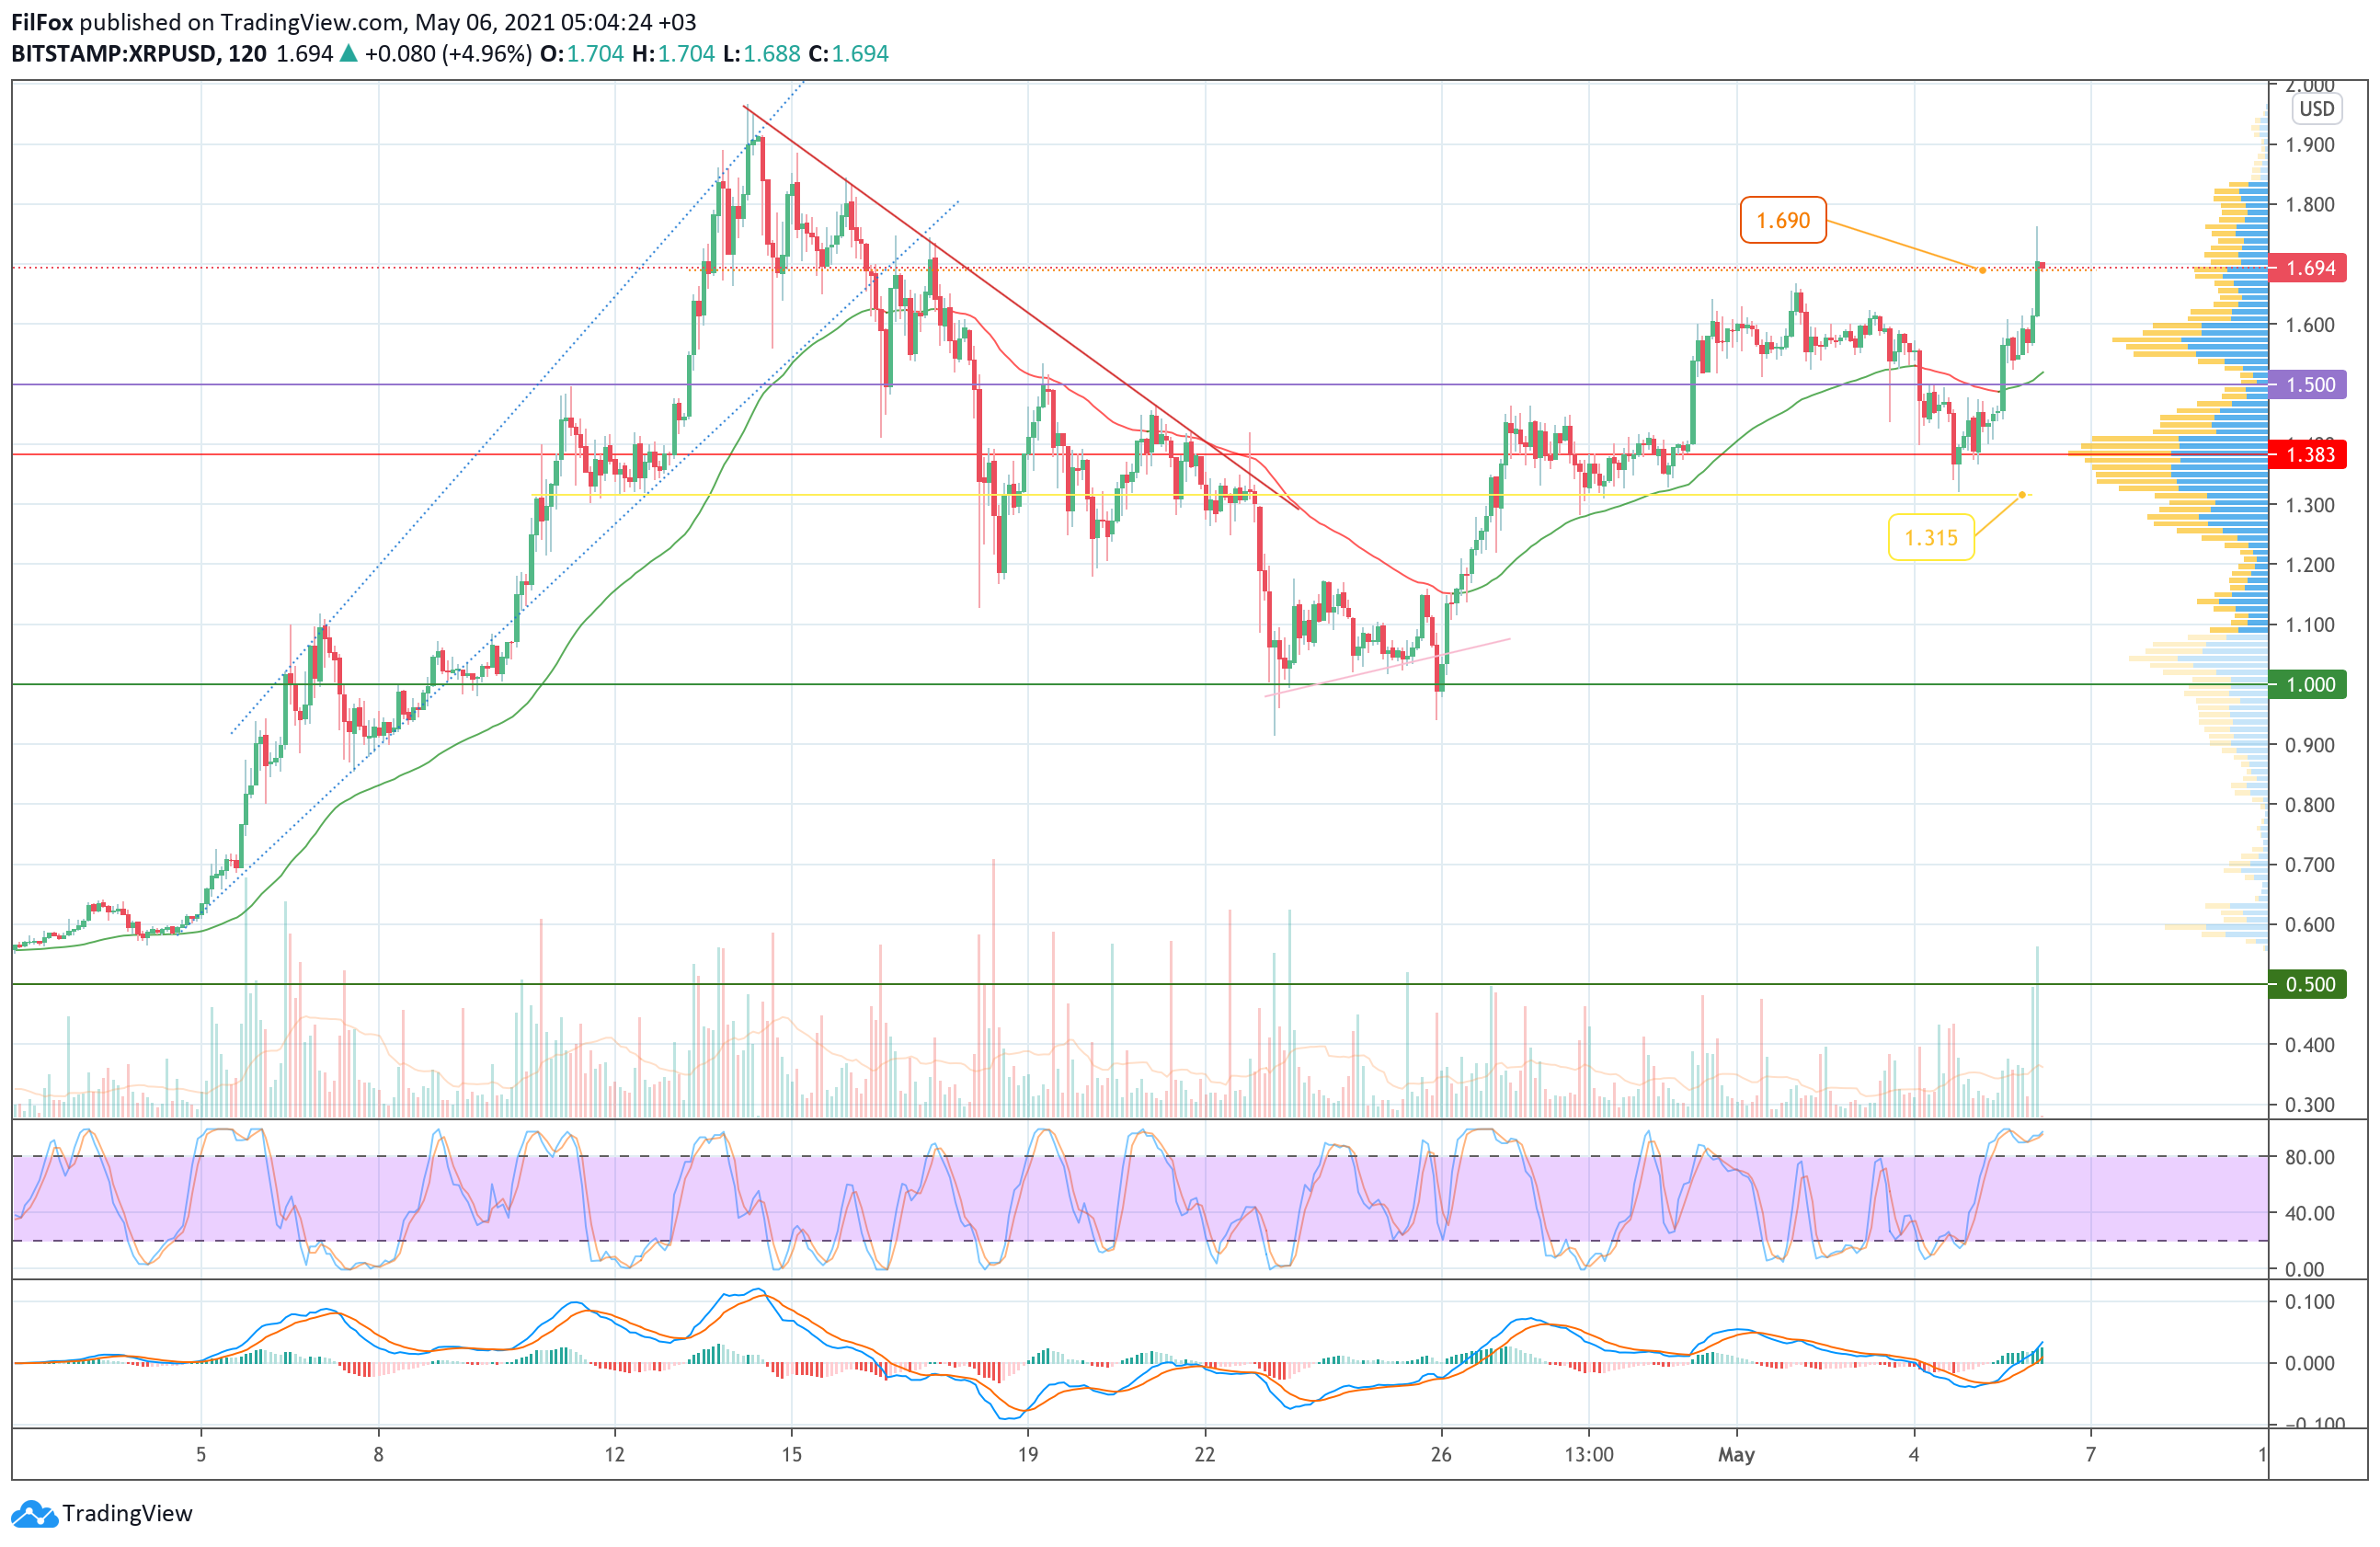 Analysis of the prices of Bitcoin, Ethereum, XRP for 05/06/2021